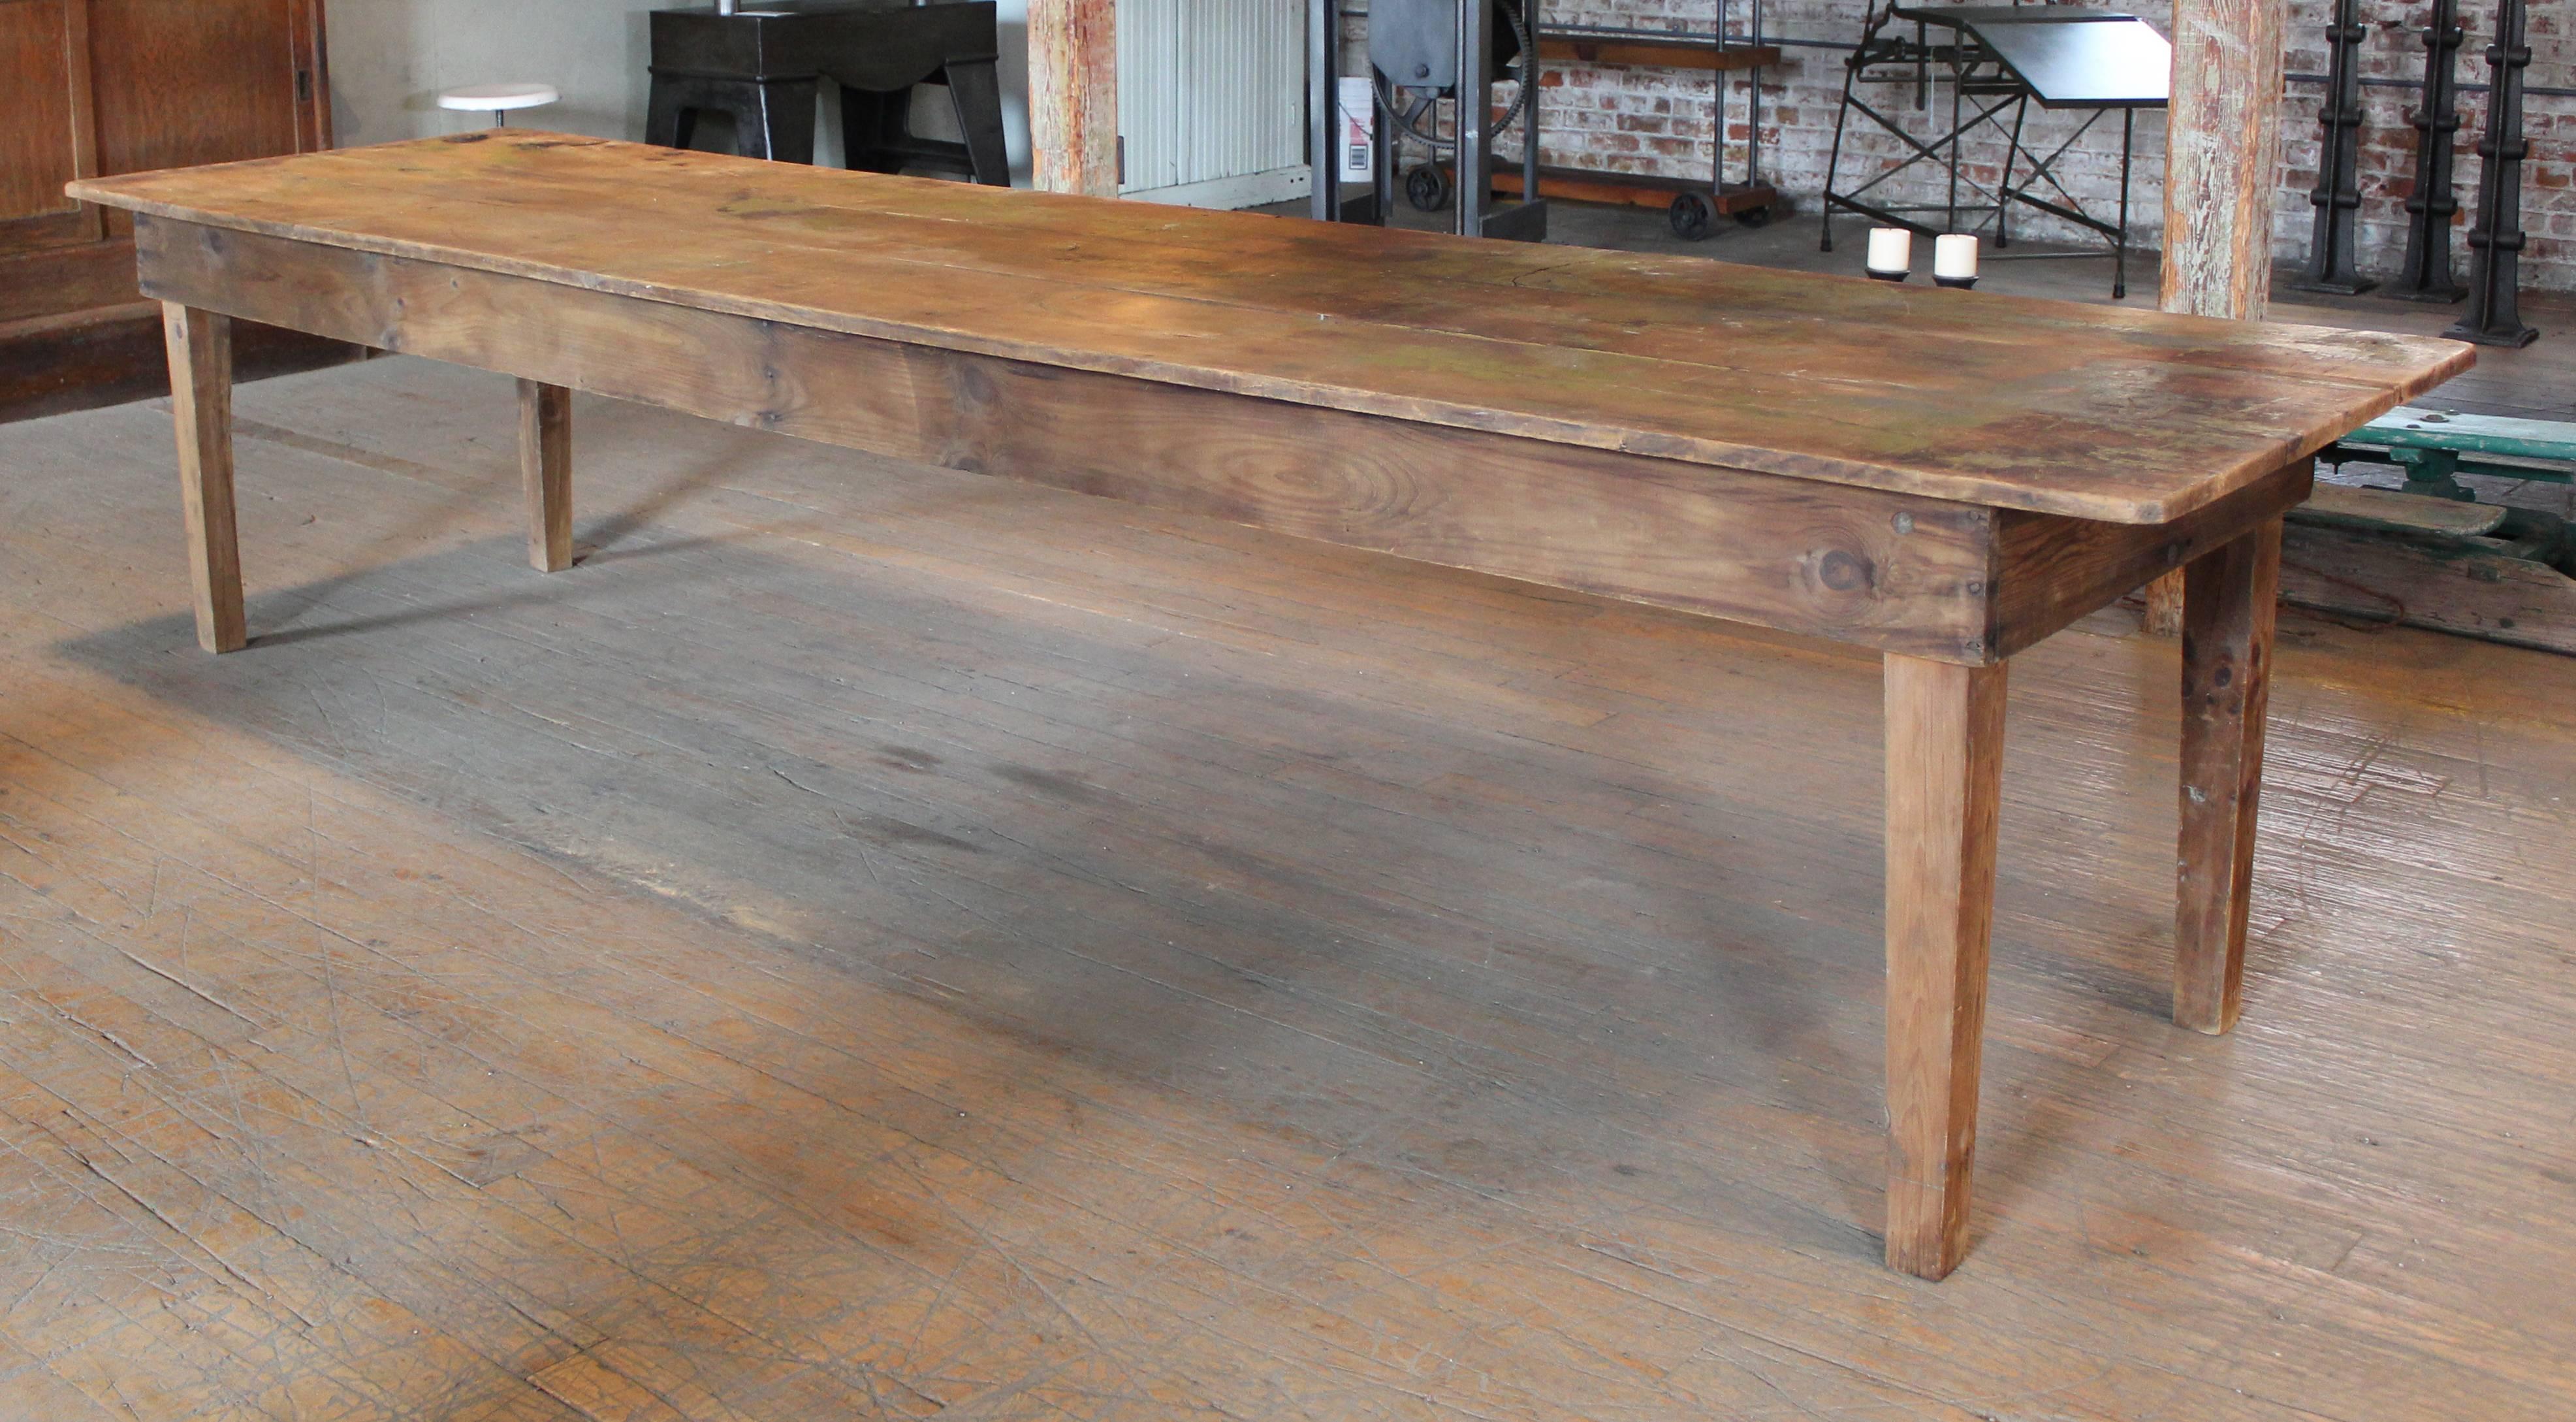 20th Century Rustic Wooden Pine Dining, Harvest, Farm Conference, Kitchen Table